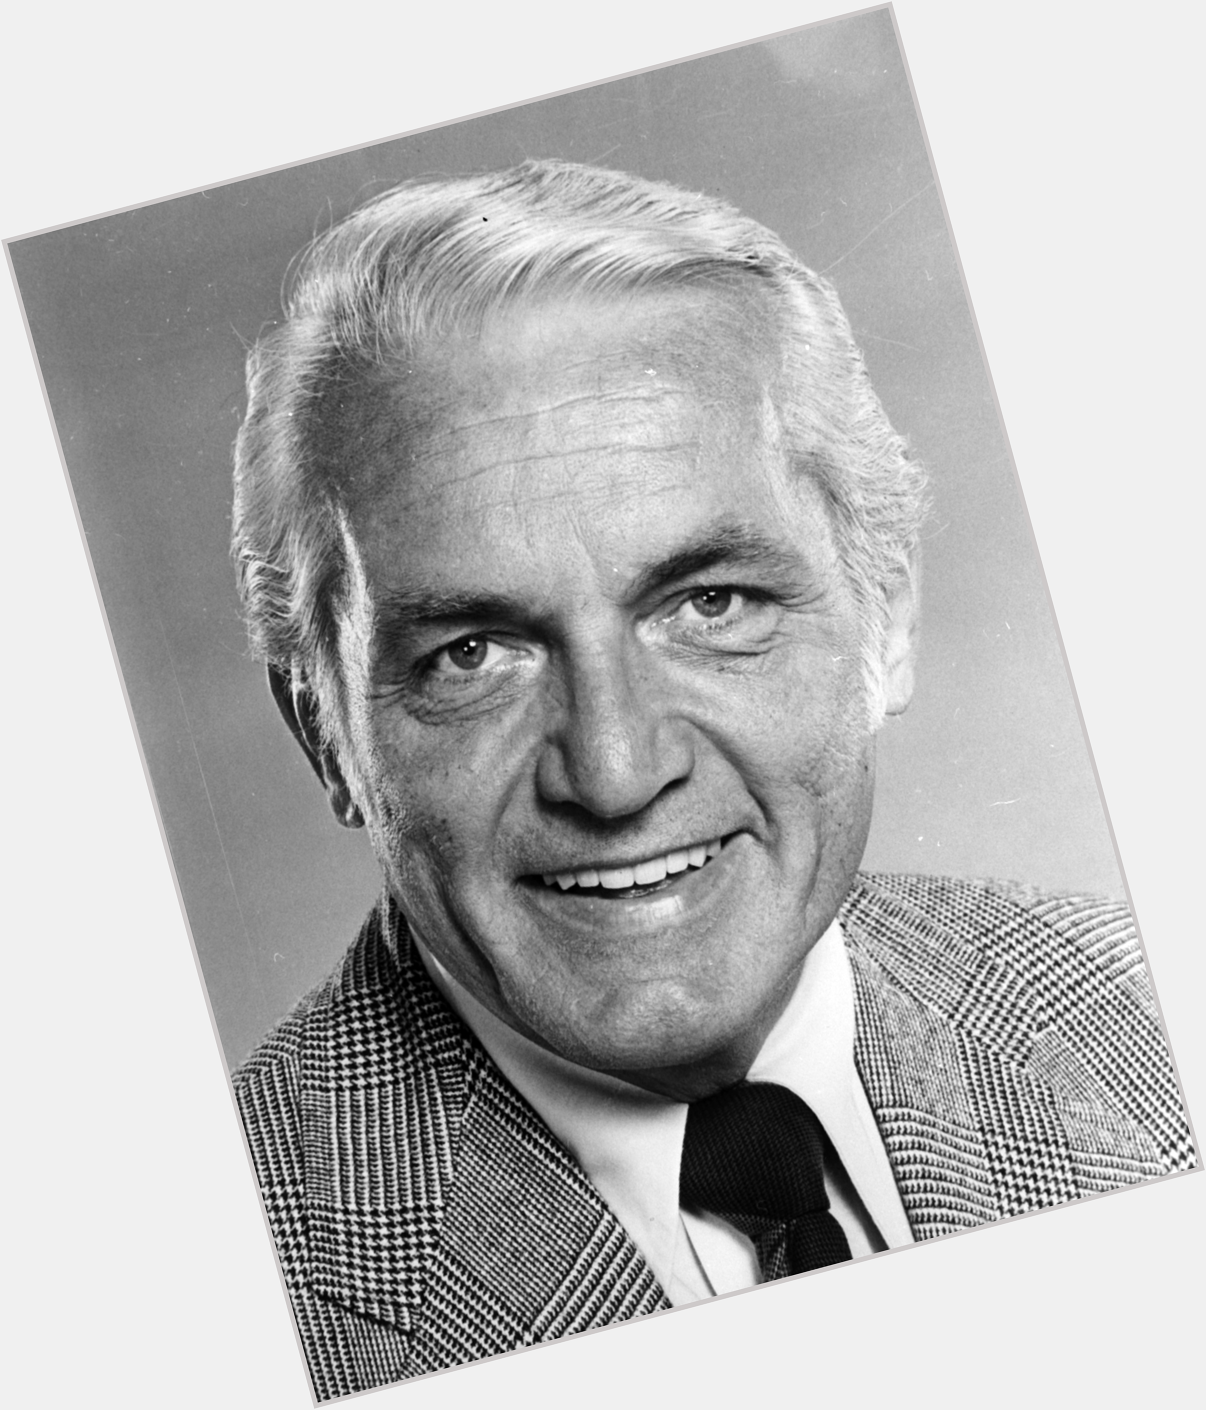 Happy 100th Birthday to Ted Knight, who played Ted Baxter on THE MARY TYLER MOORE SHOW!! 